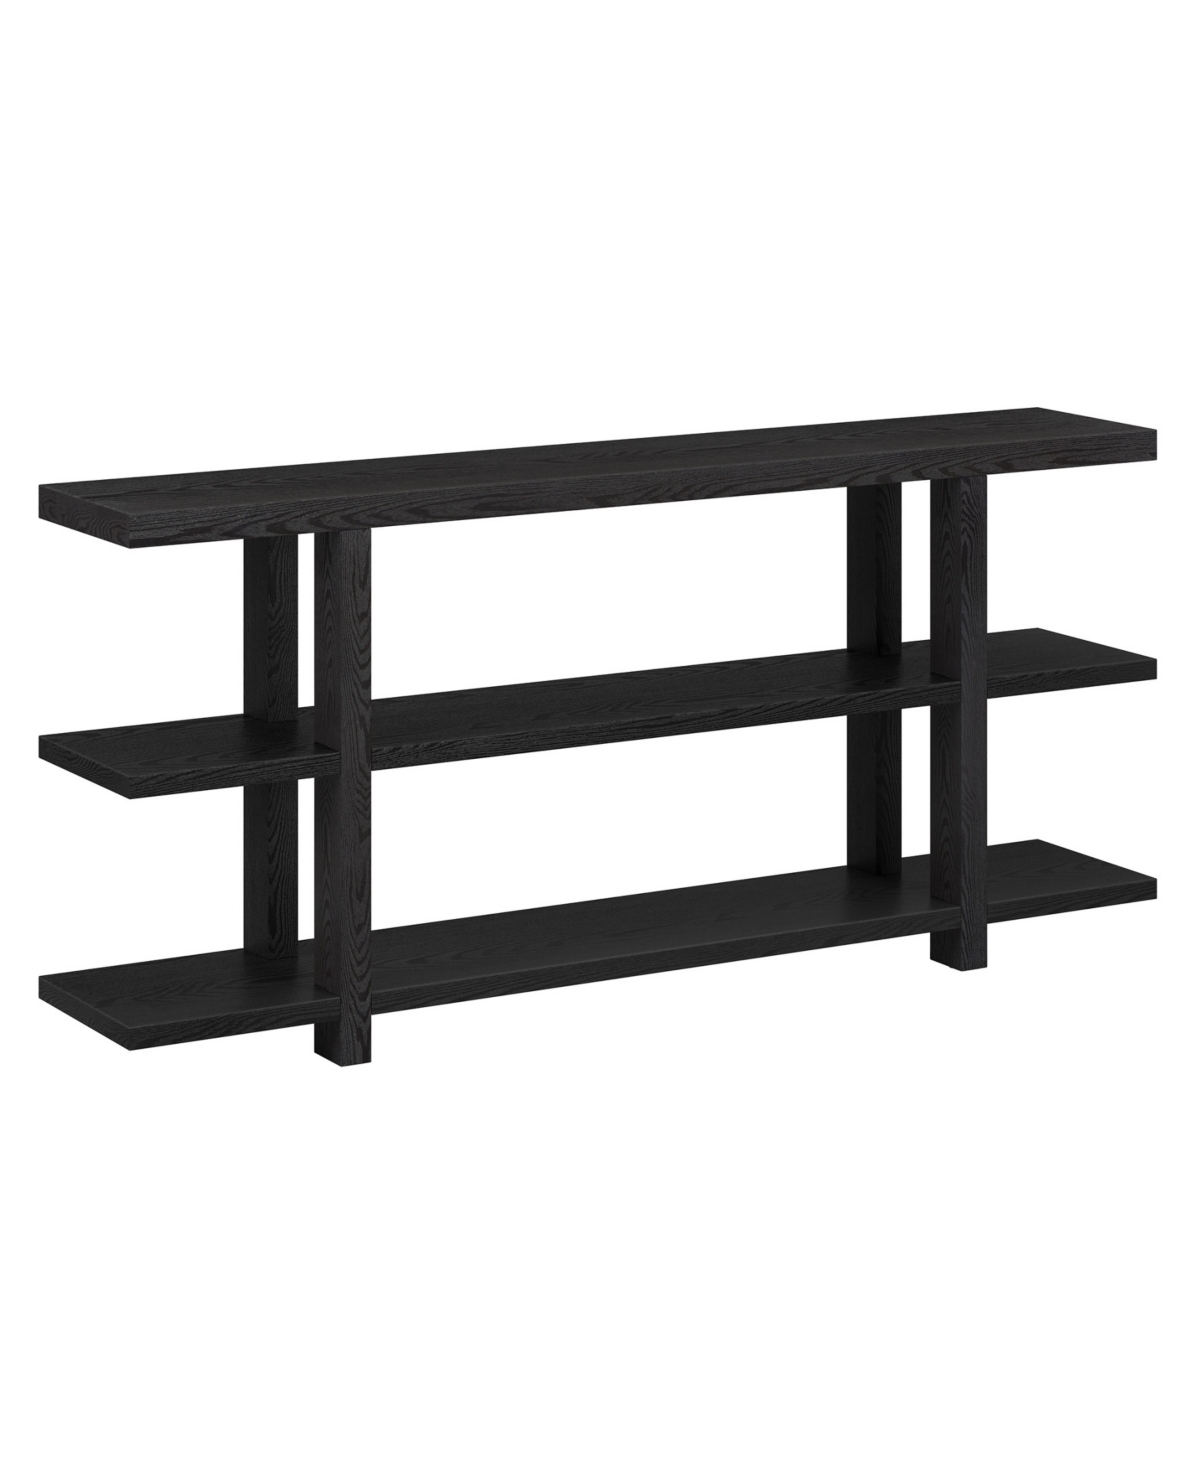 Hudson & Canal Acosta 64" Wide Rectangular Console Table In Black Grain